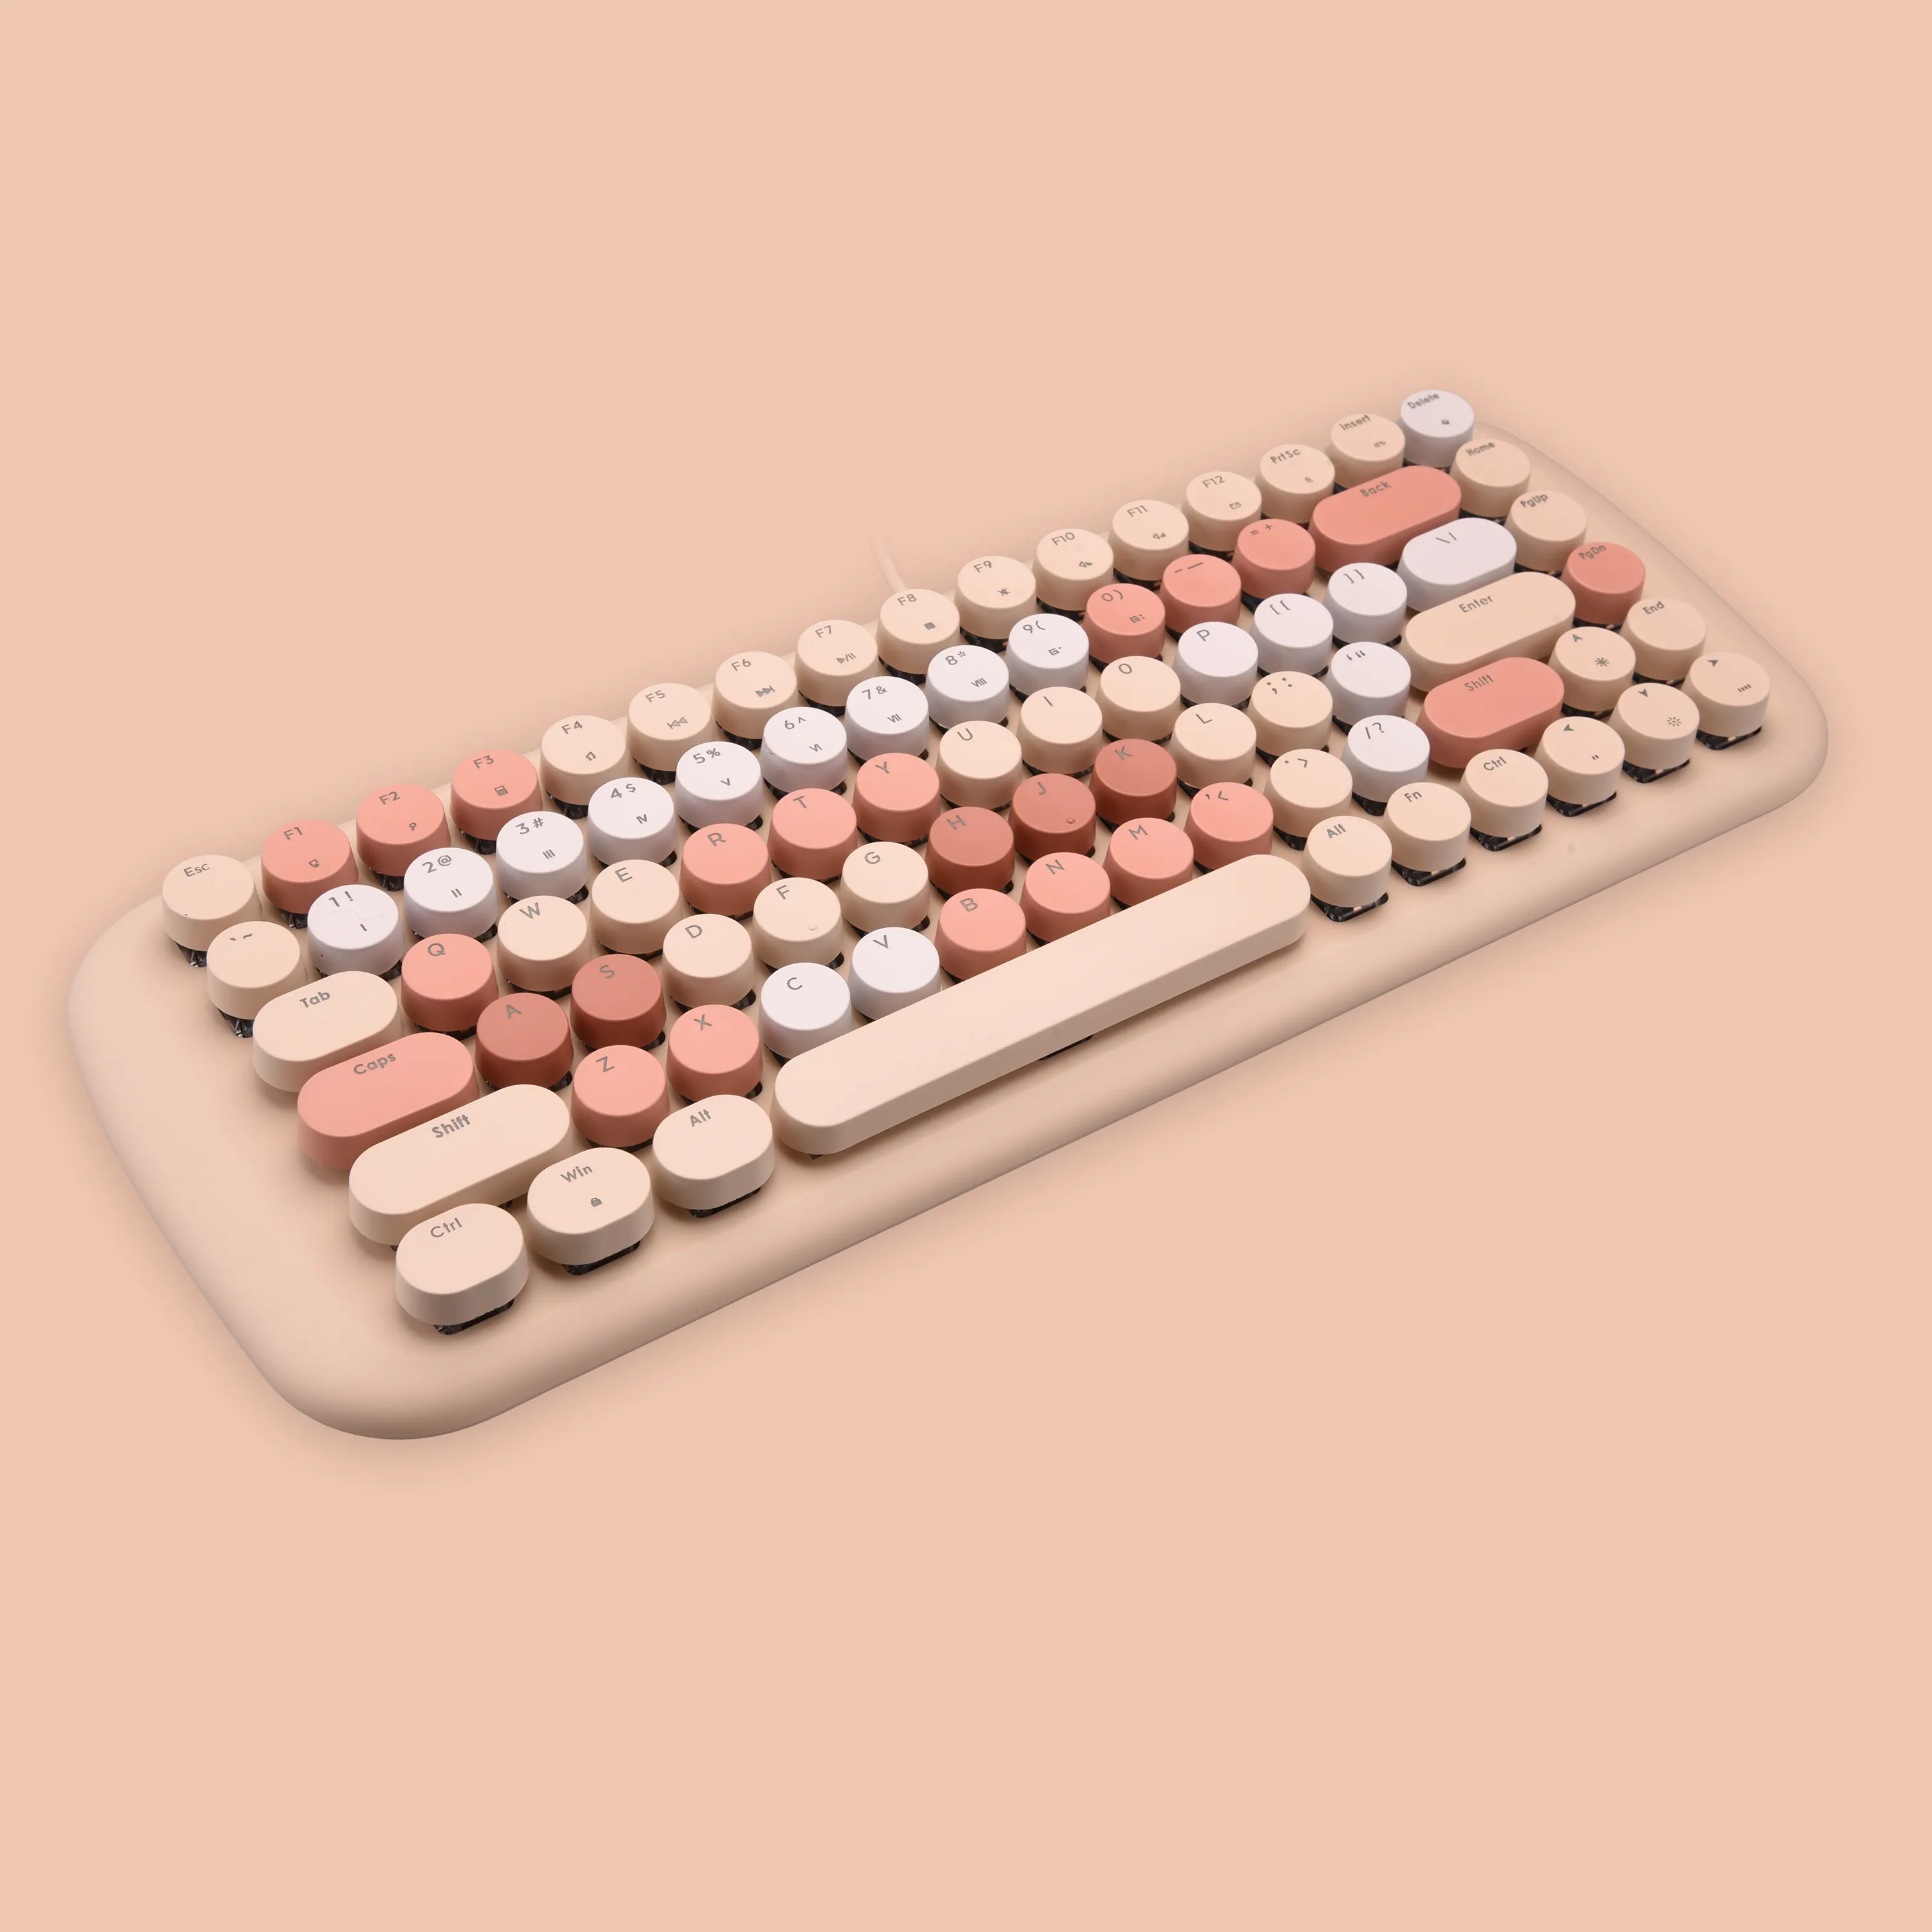 Keyboard Pink Mouse Abs Materialoil Painting Letter Printing Mechanical Keyboard